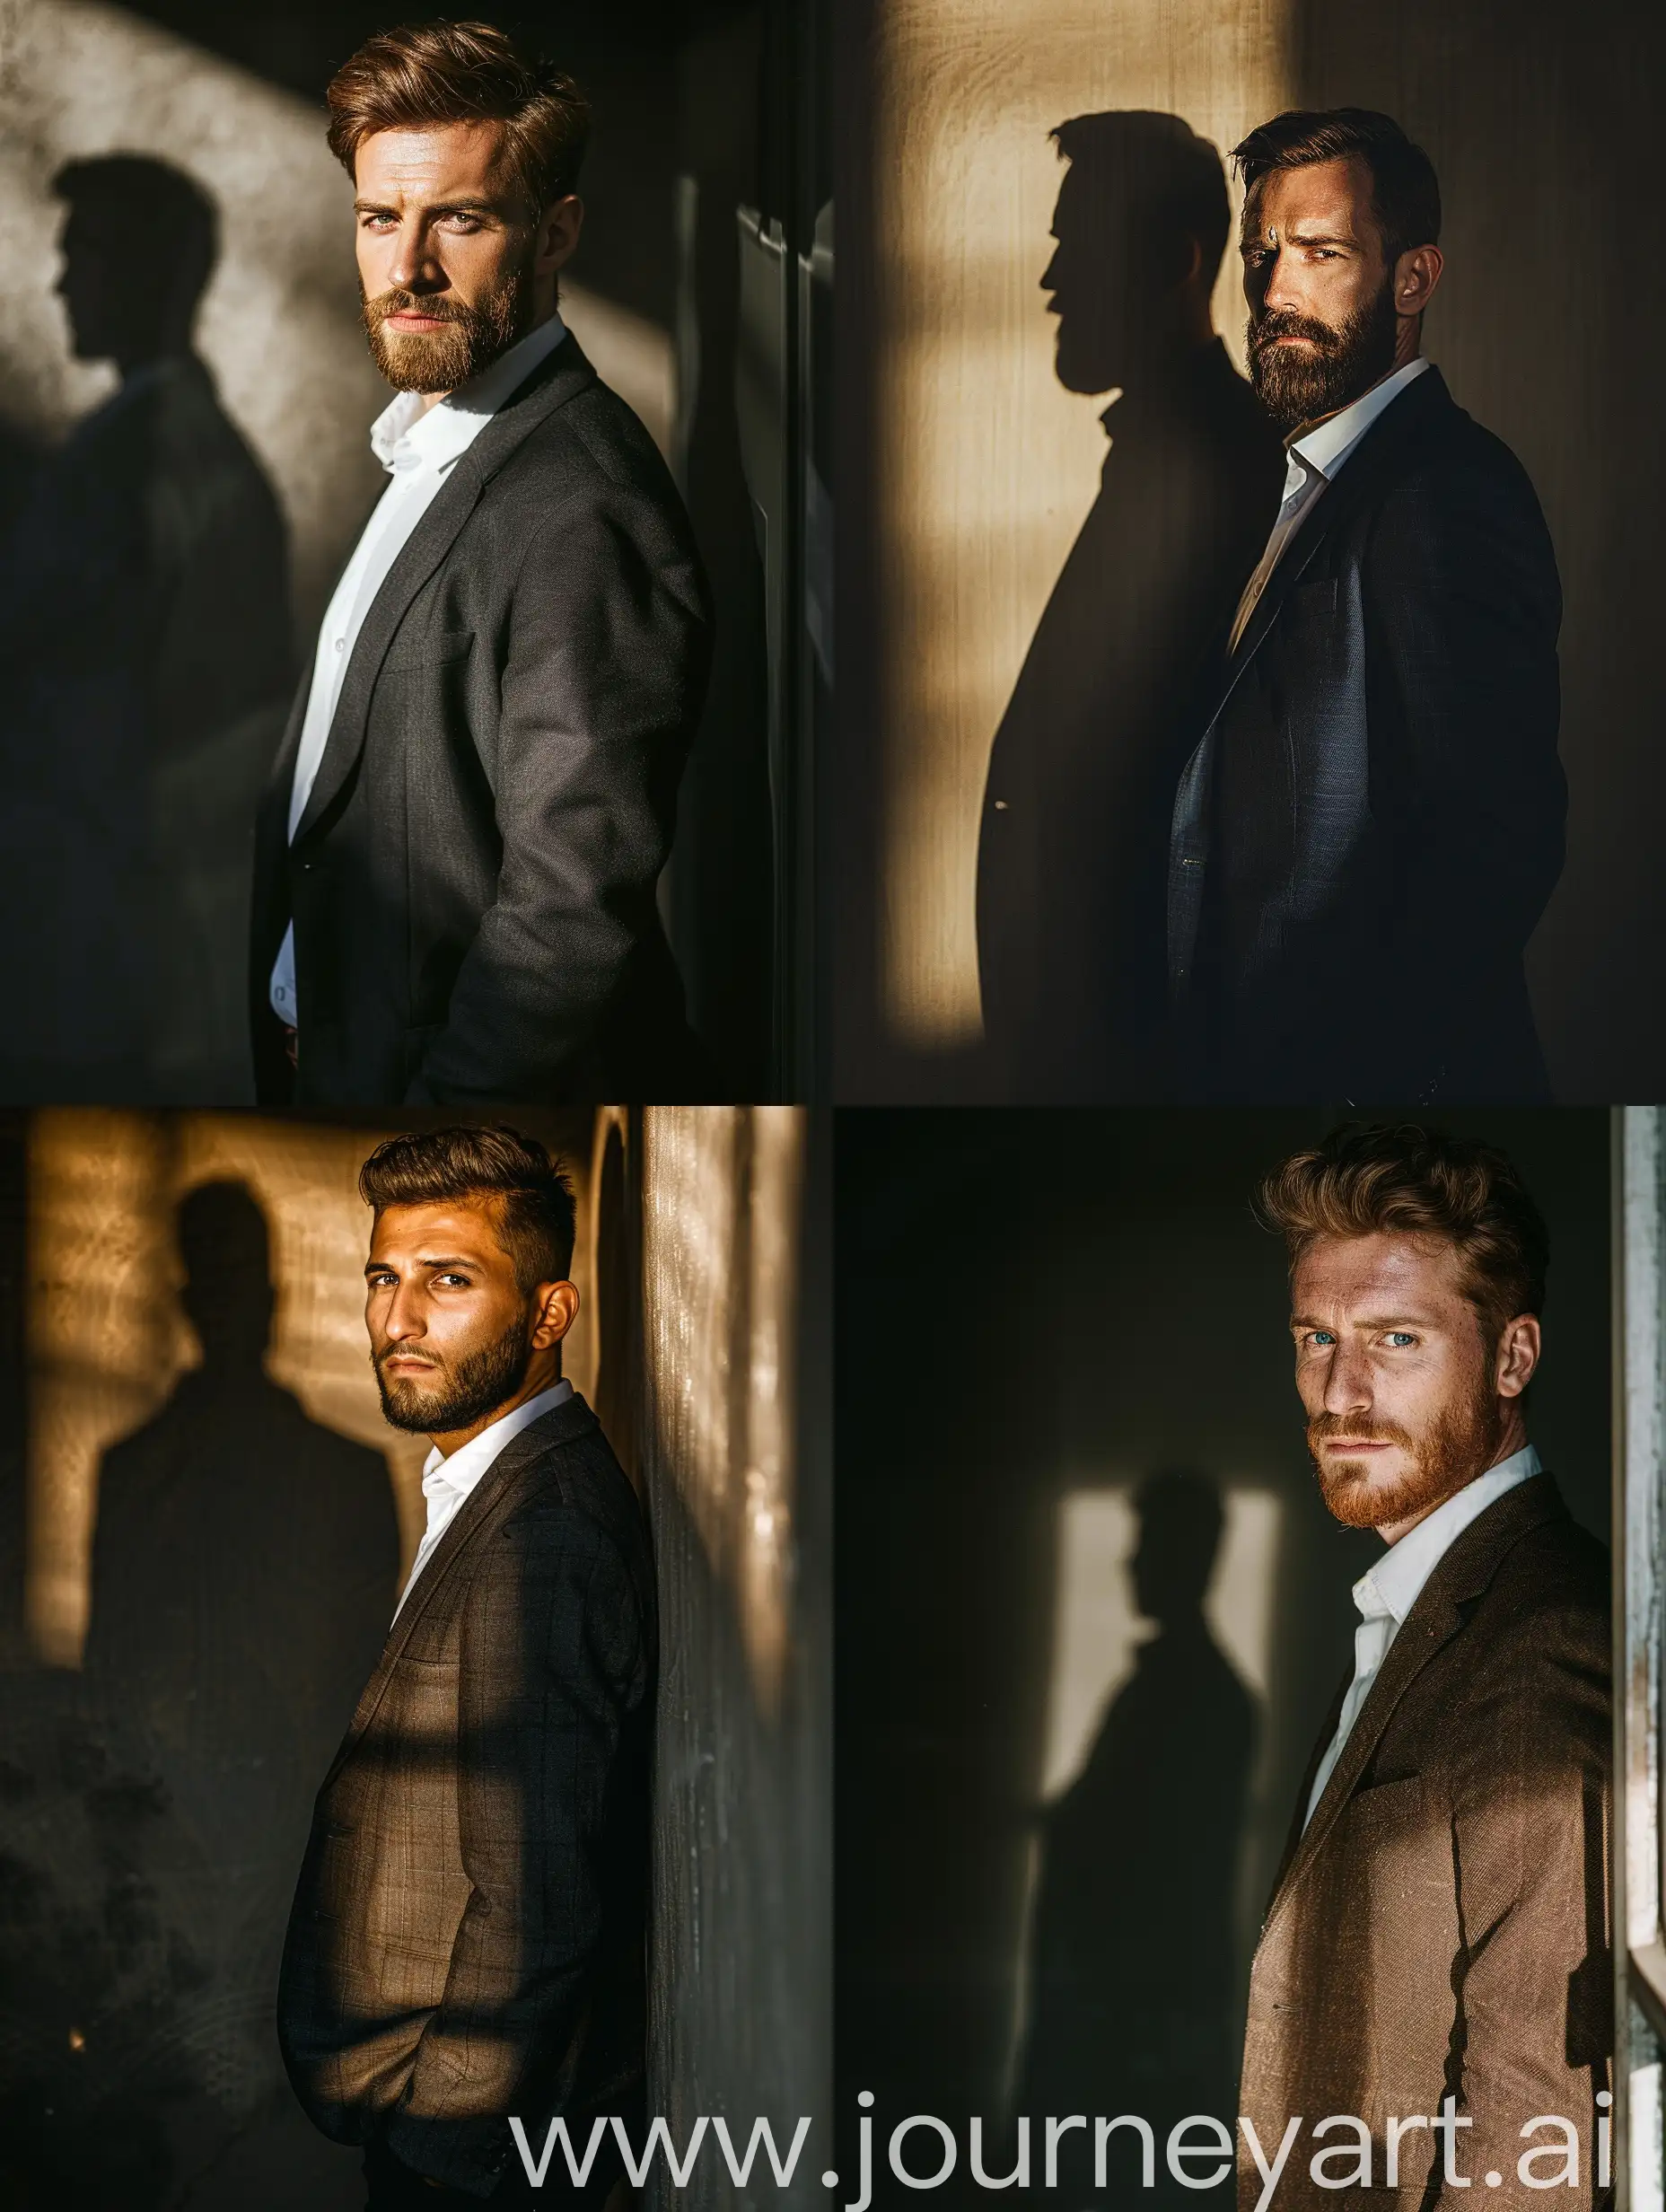 Front View Photography From A Man with Simple Hair Style & Beard Standing Next to the Wall in Dark Place In front of the camera The Light Shines on the Man And the Shadow of the Man on the Wall, Formal Outfit, Cinematic Photography Style, Natural Shadow, Natural Color Details, High Quality --v 6.0 --ar 3:4